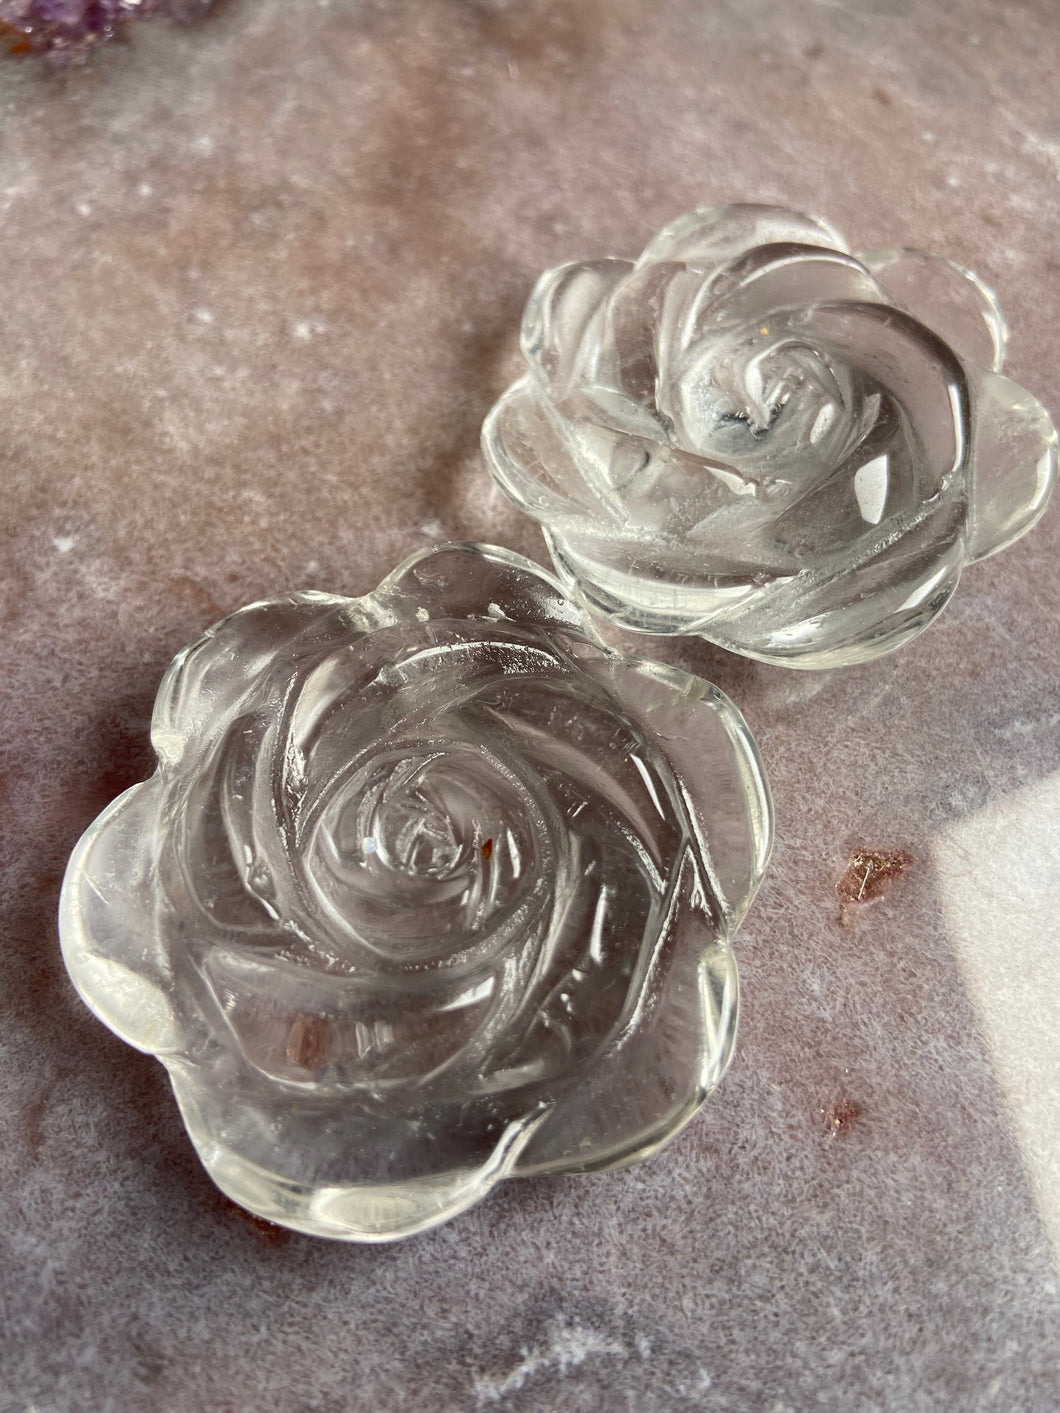 Quartz rose - intuitively picked